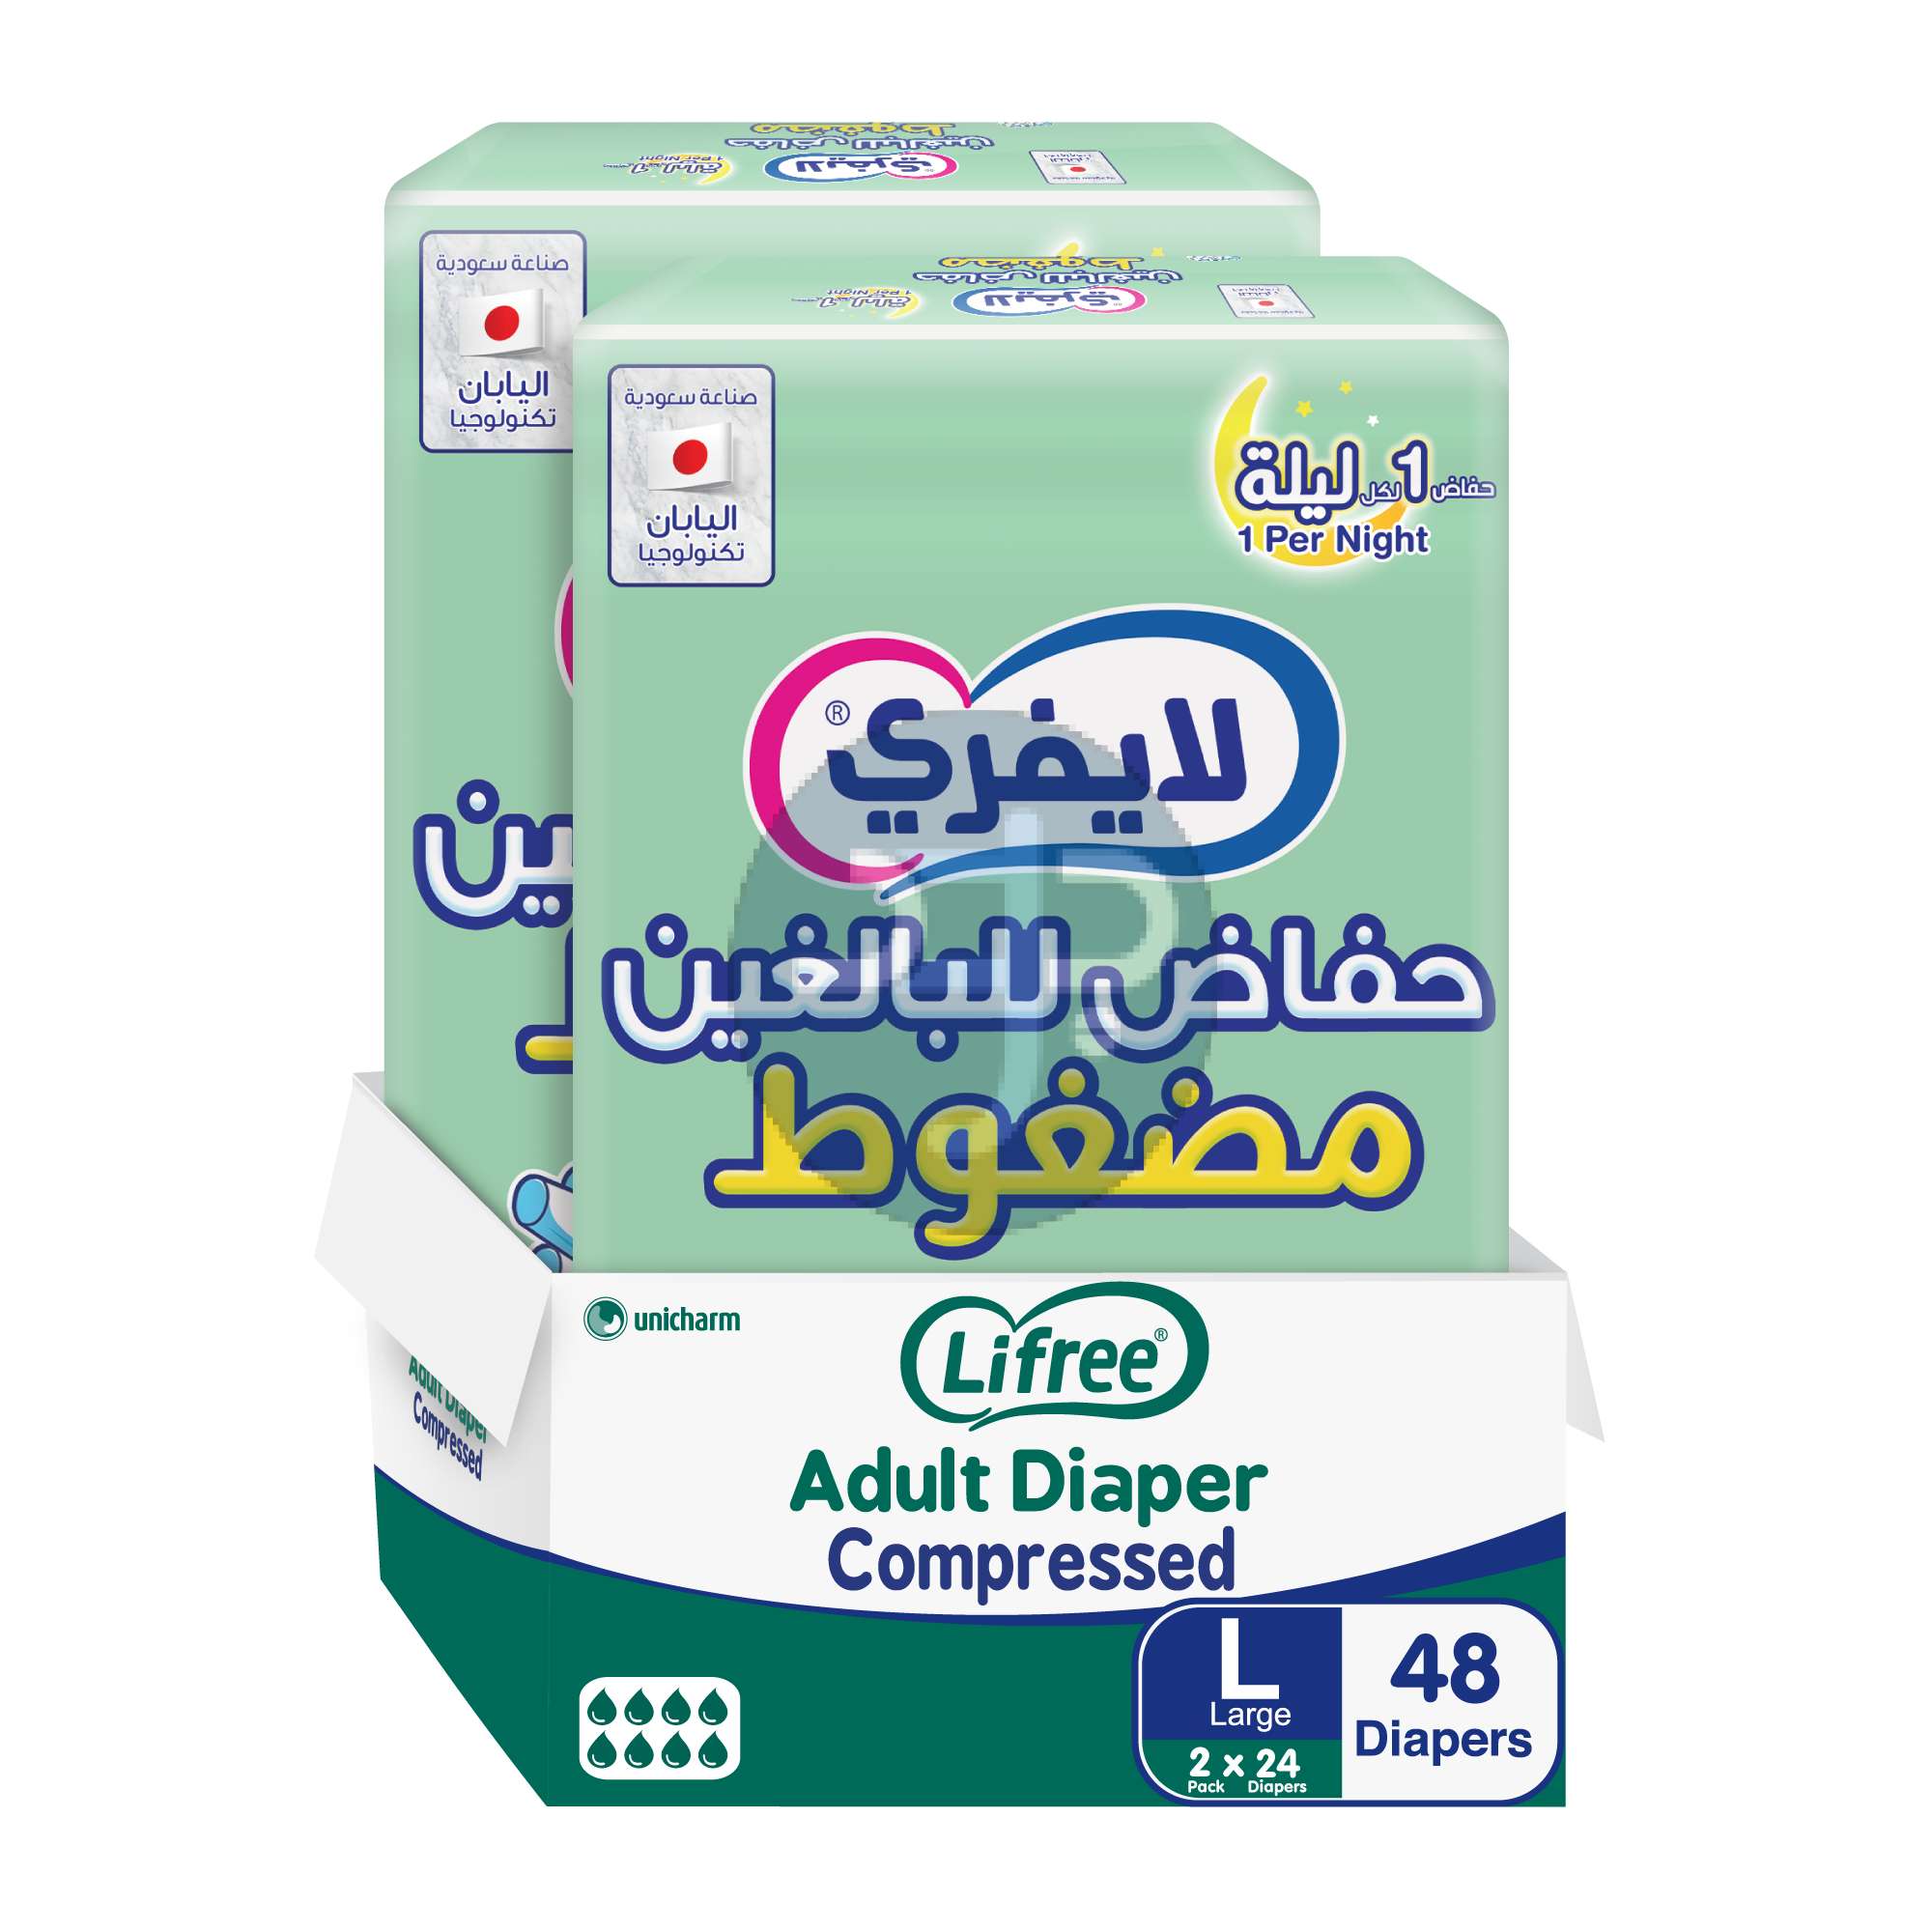 Product-Lifree Compressed Adult Diaper Tape, Large Size , 8 Cup Absorbency, Jumbo Box, 48 Pieces